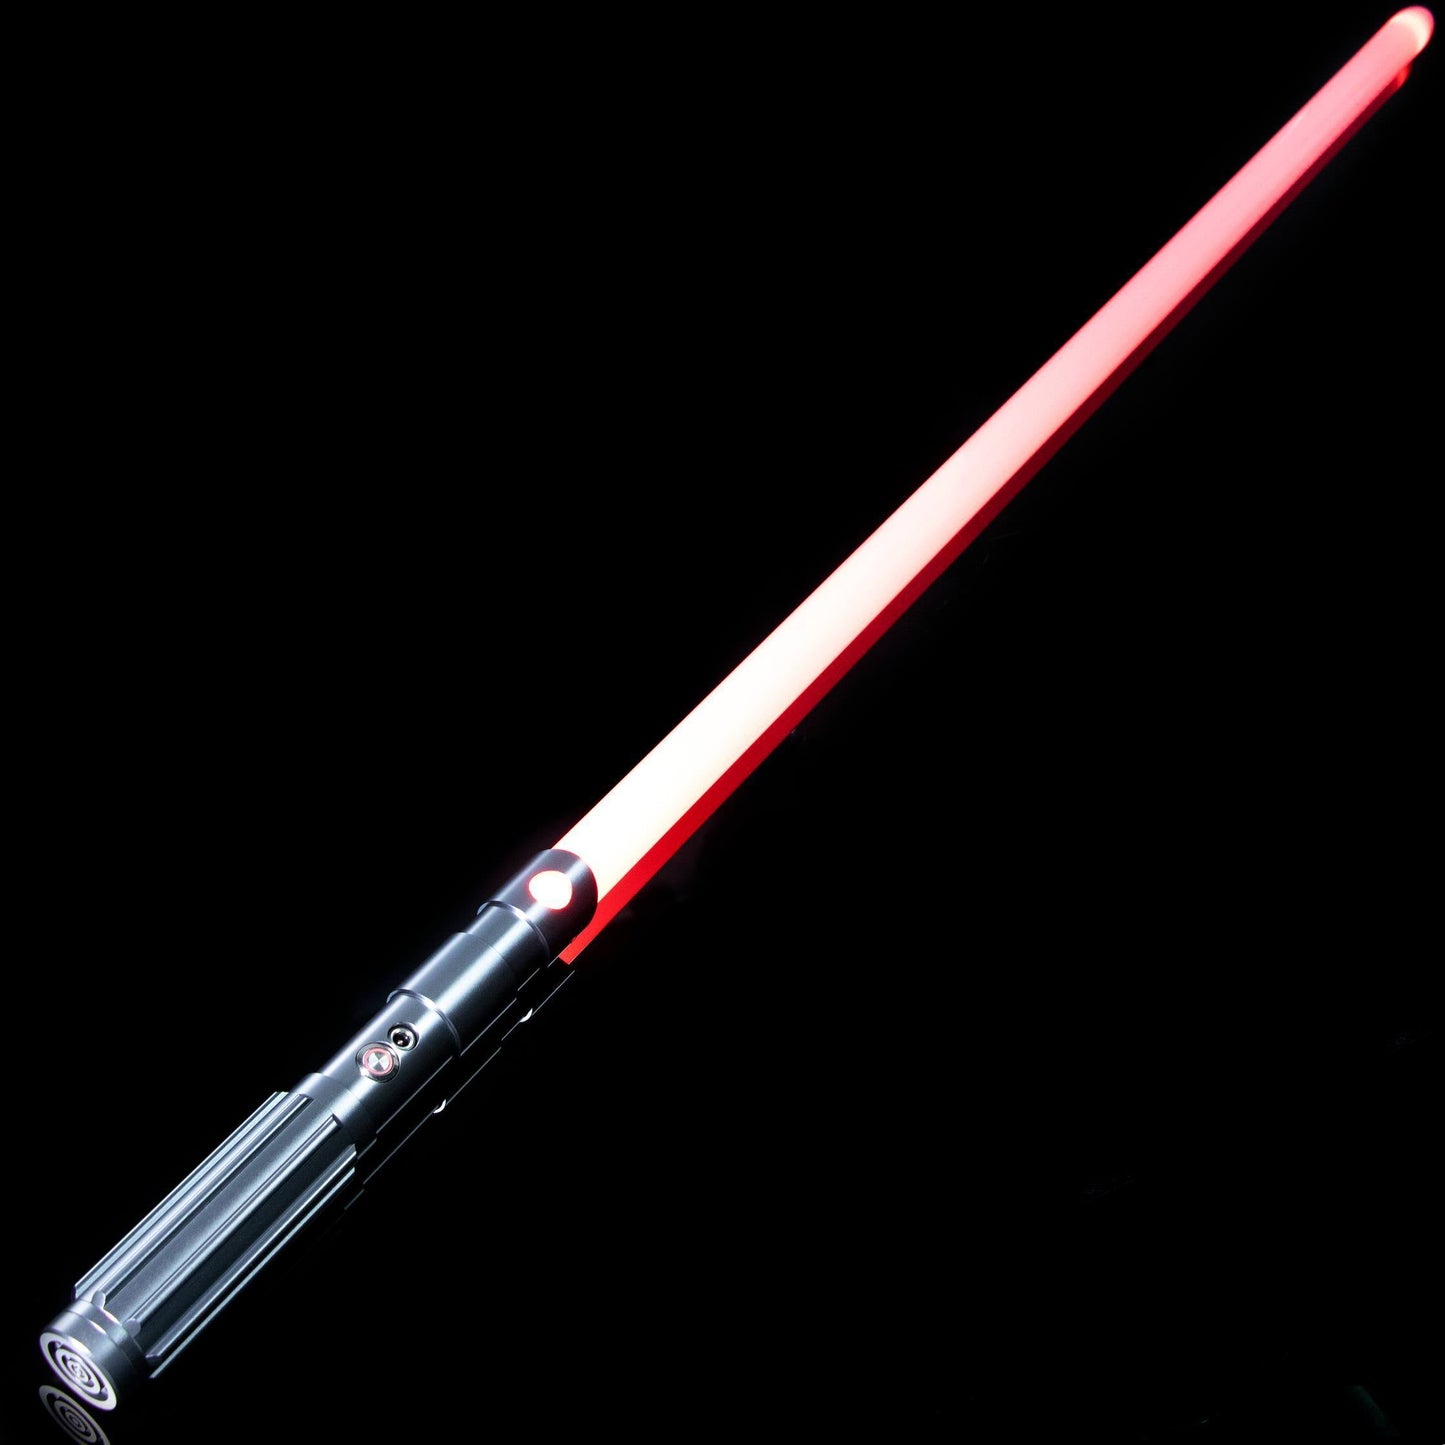 Power Lightsaber isabers